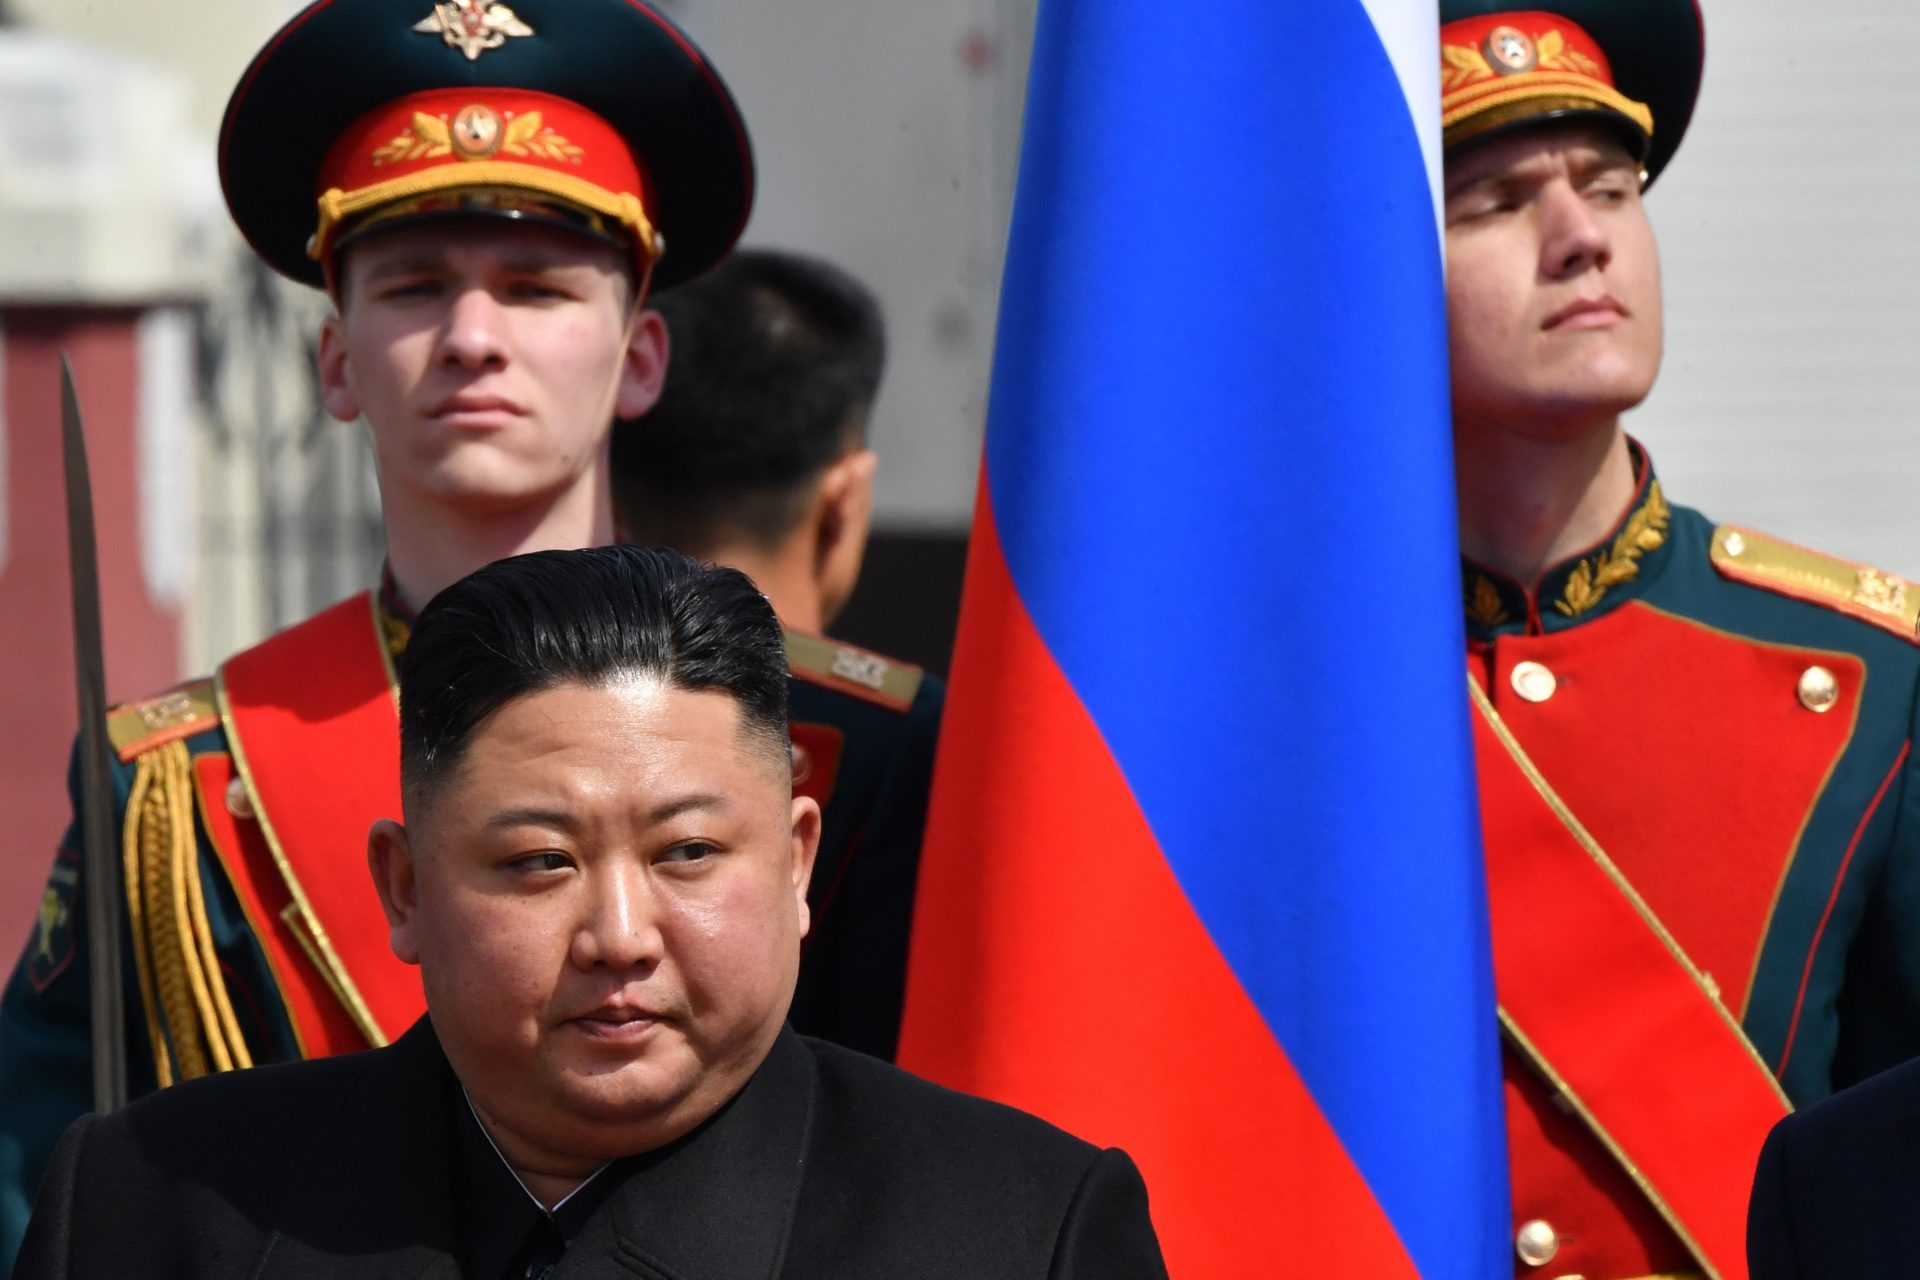 Kim Jong Un is in Russia -will he make an arms deal with Putin?